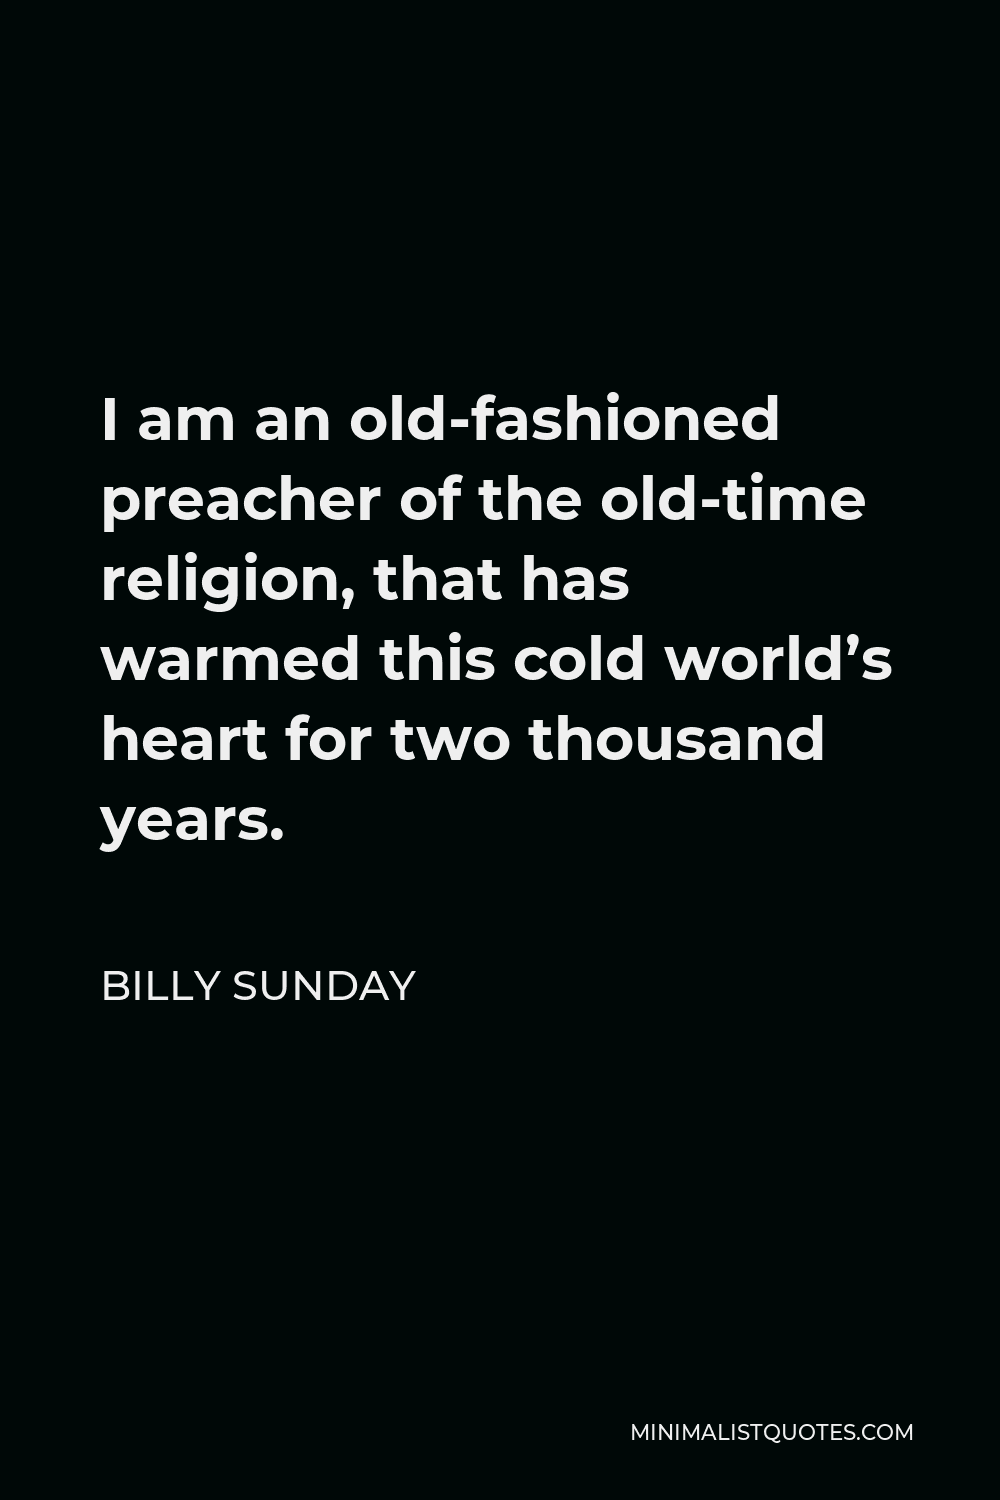 Billy Sunday Quote - I am an old-fashioned preacher of the old-time religion, that has warmed this cold world’s heart for two thousand years.